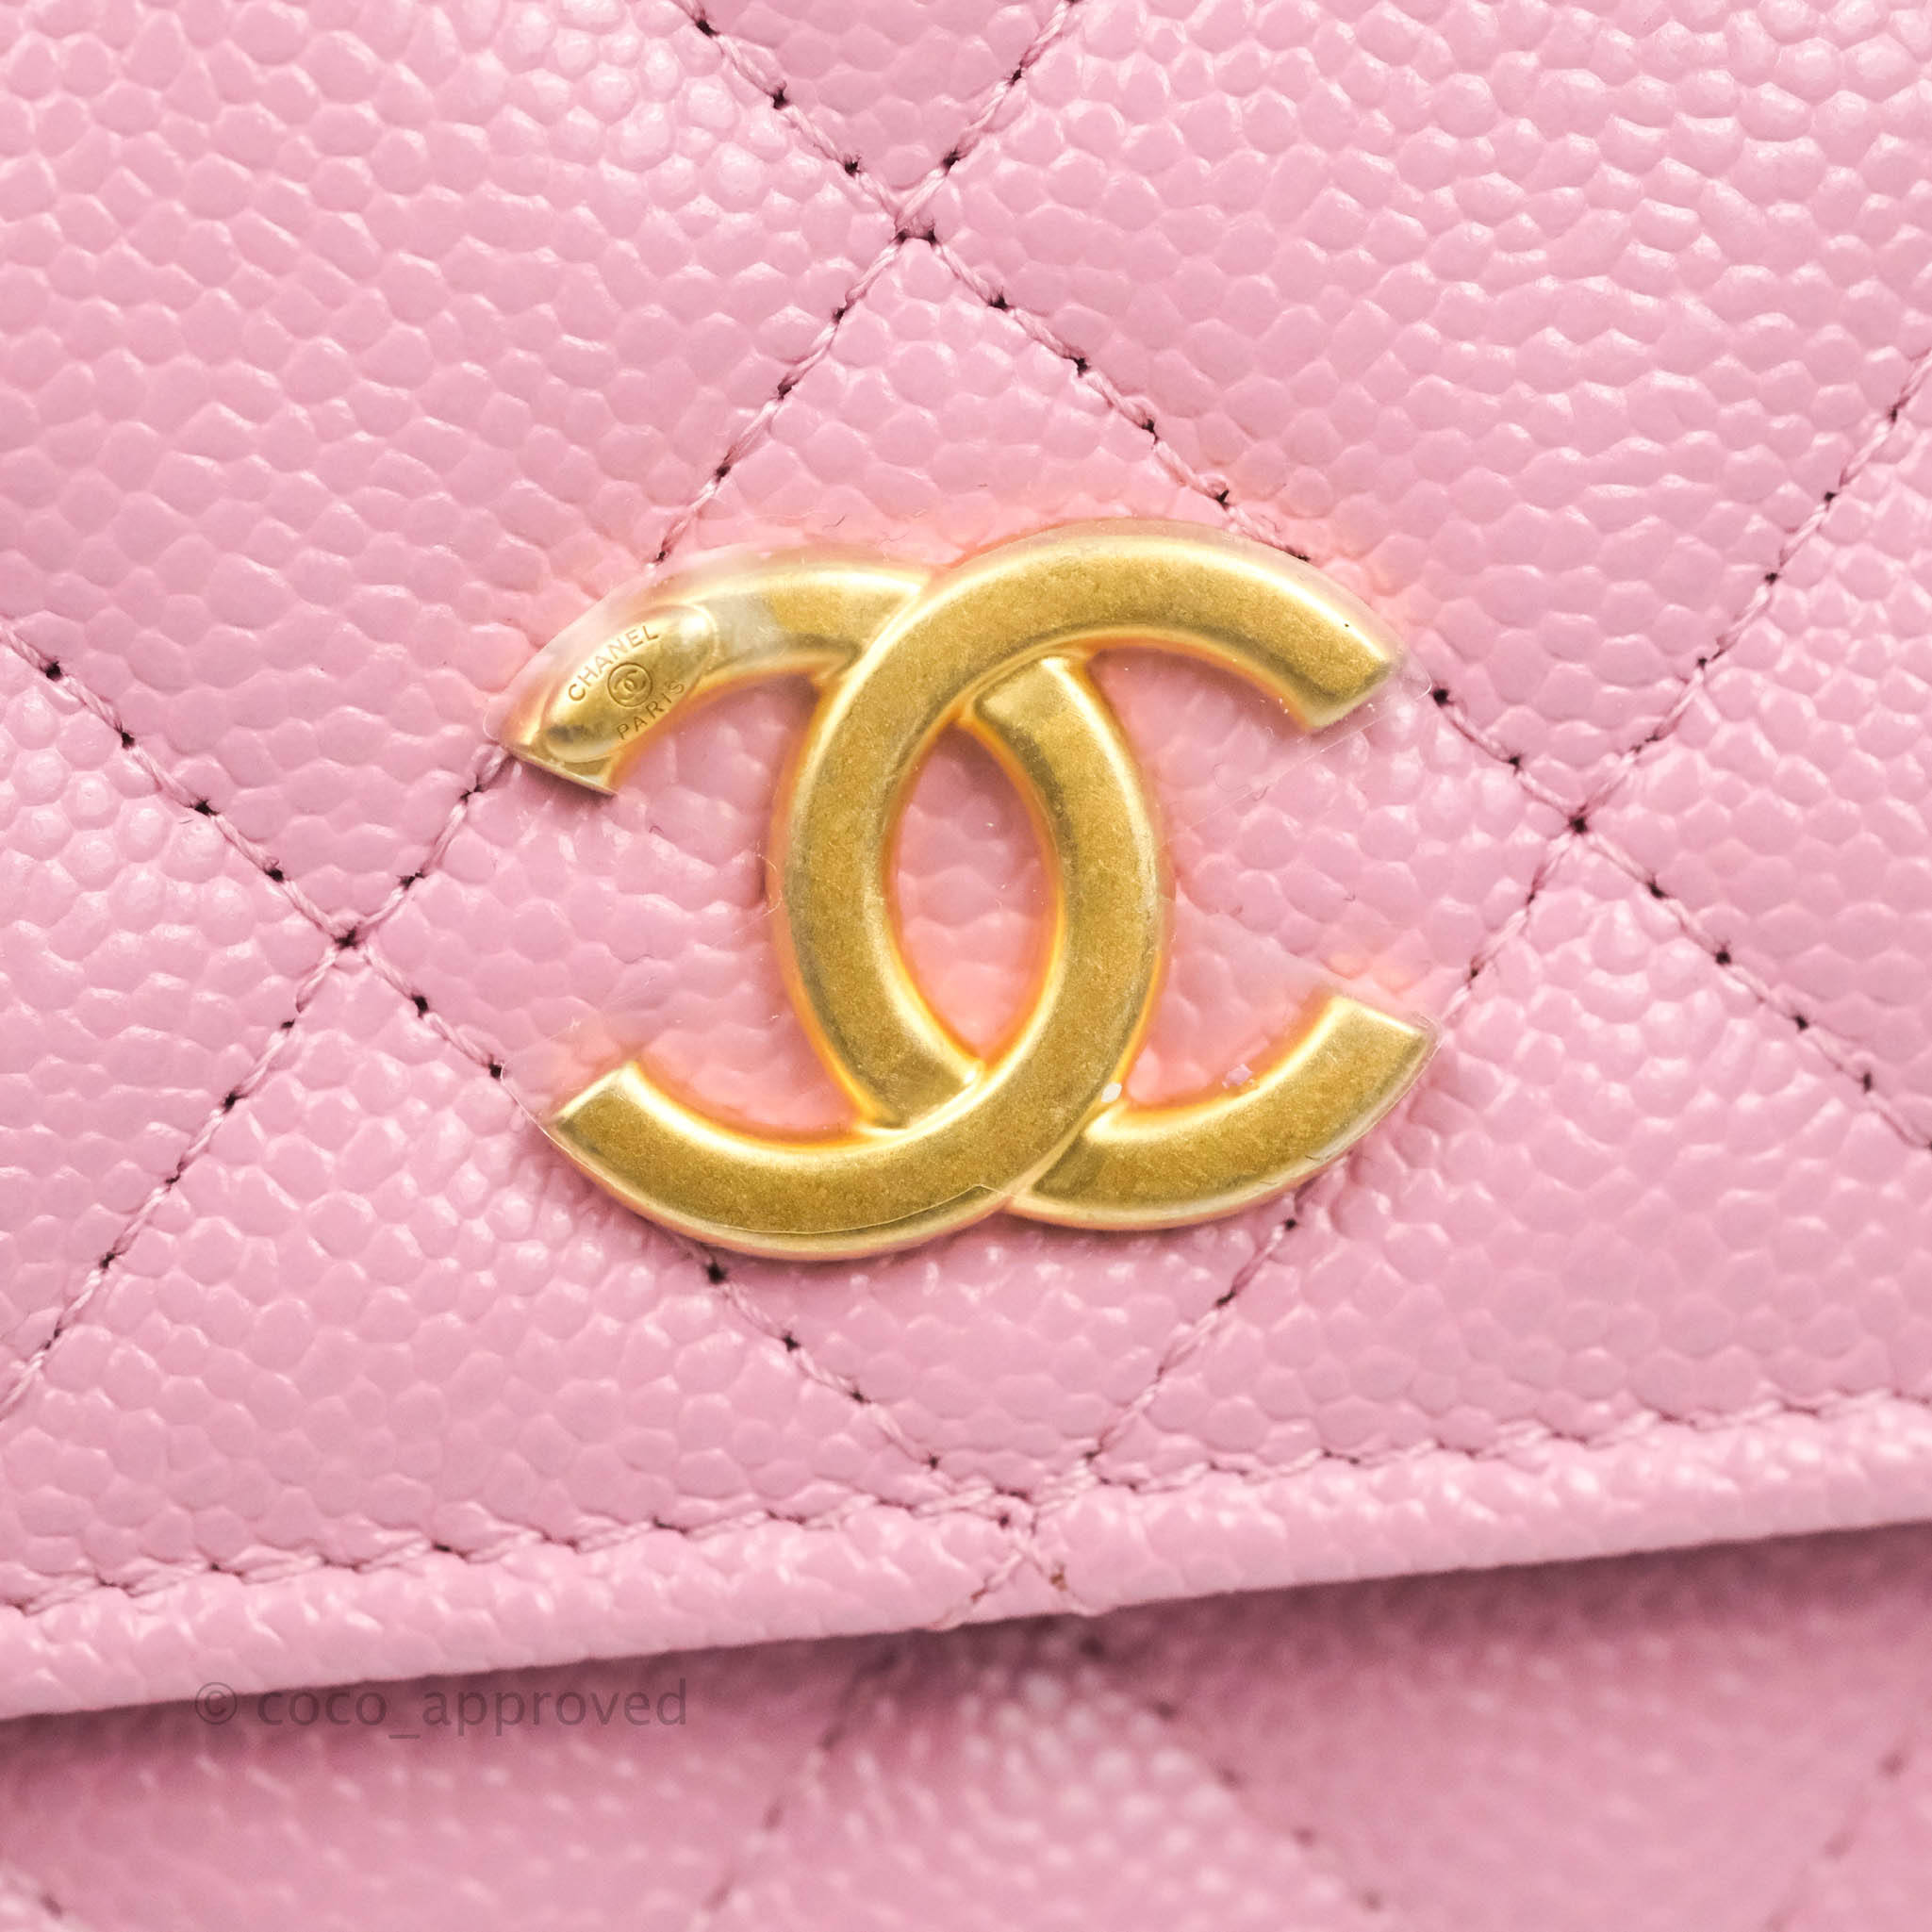 Chanel Wallet on Chain with Top Handle, Pink Caviar with Gold Hardware, New  in Box WA001